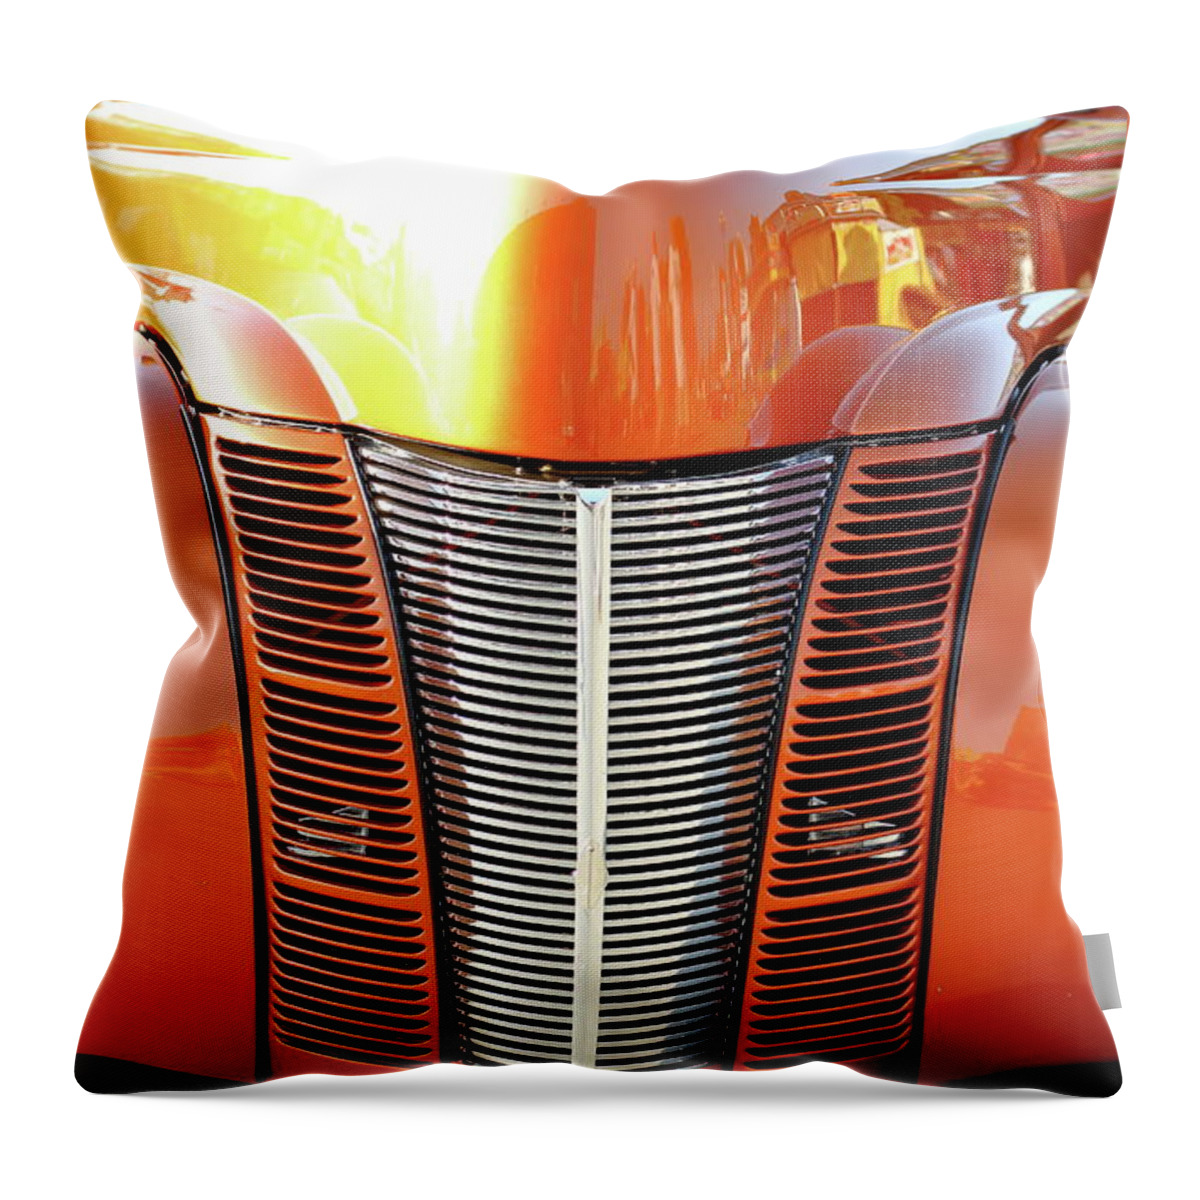 Car Throw Pillow featuring the photograph Glowing by Lens Art Photography By Larry Trager